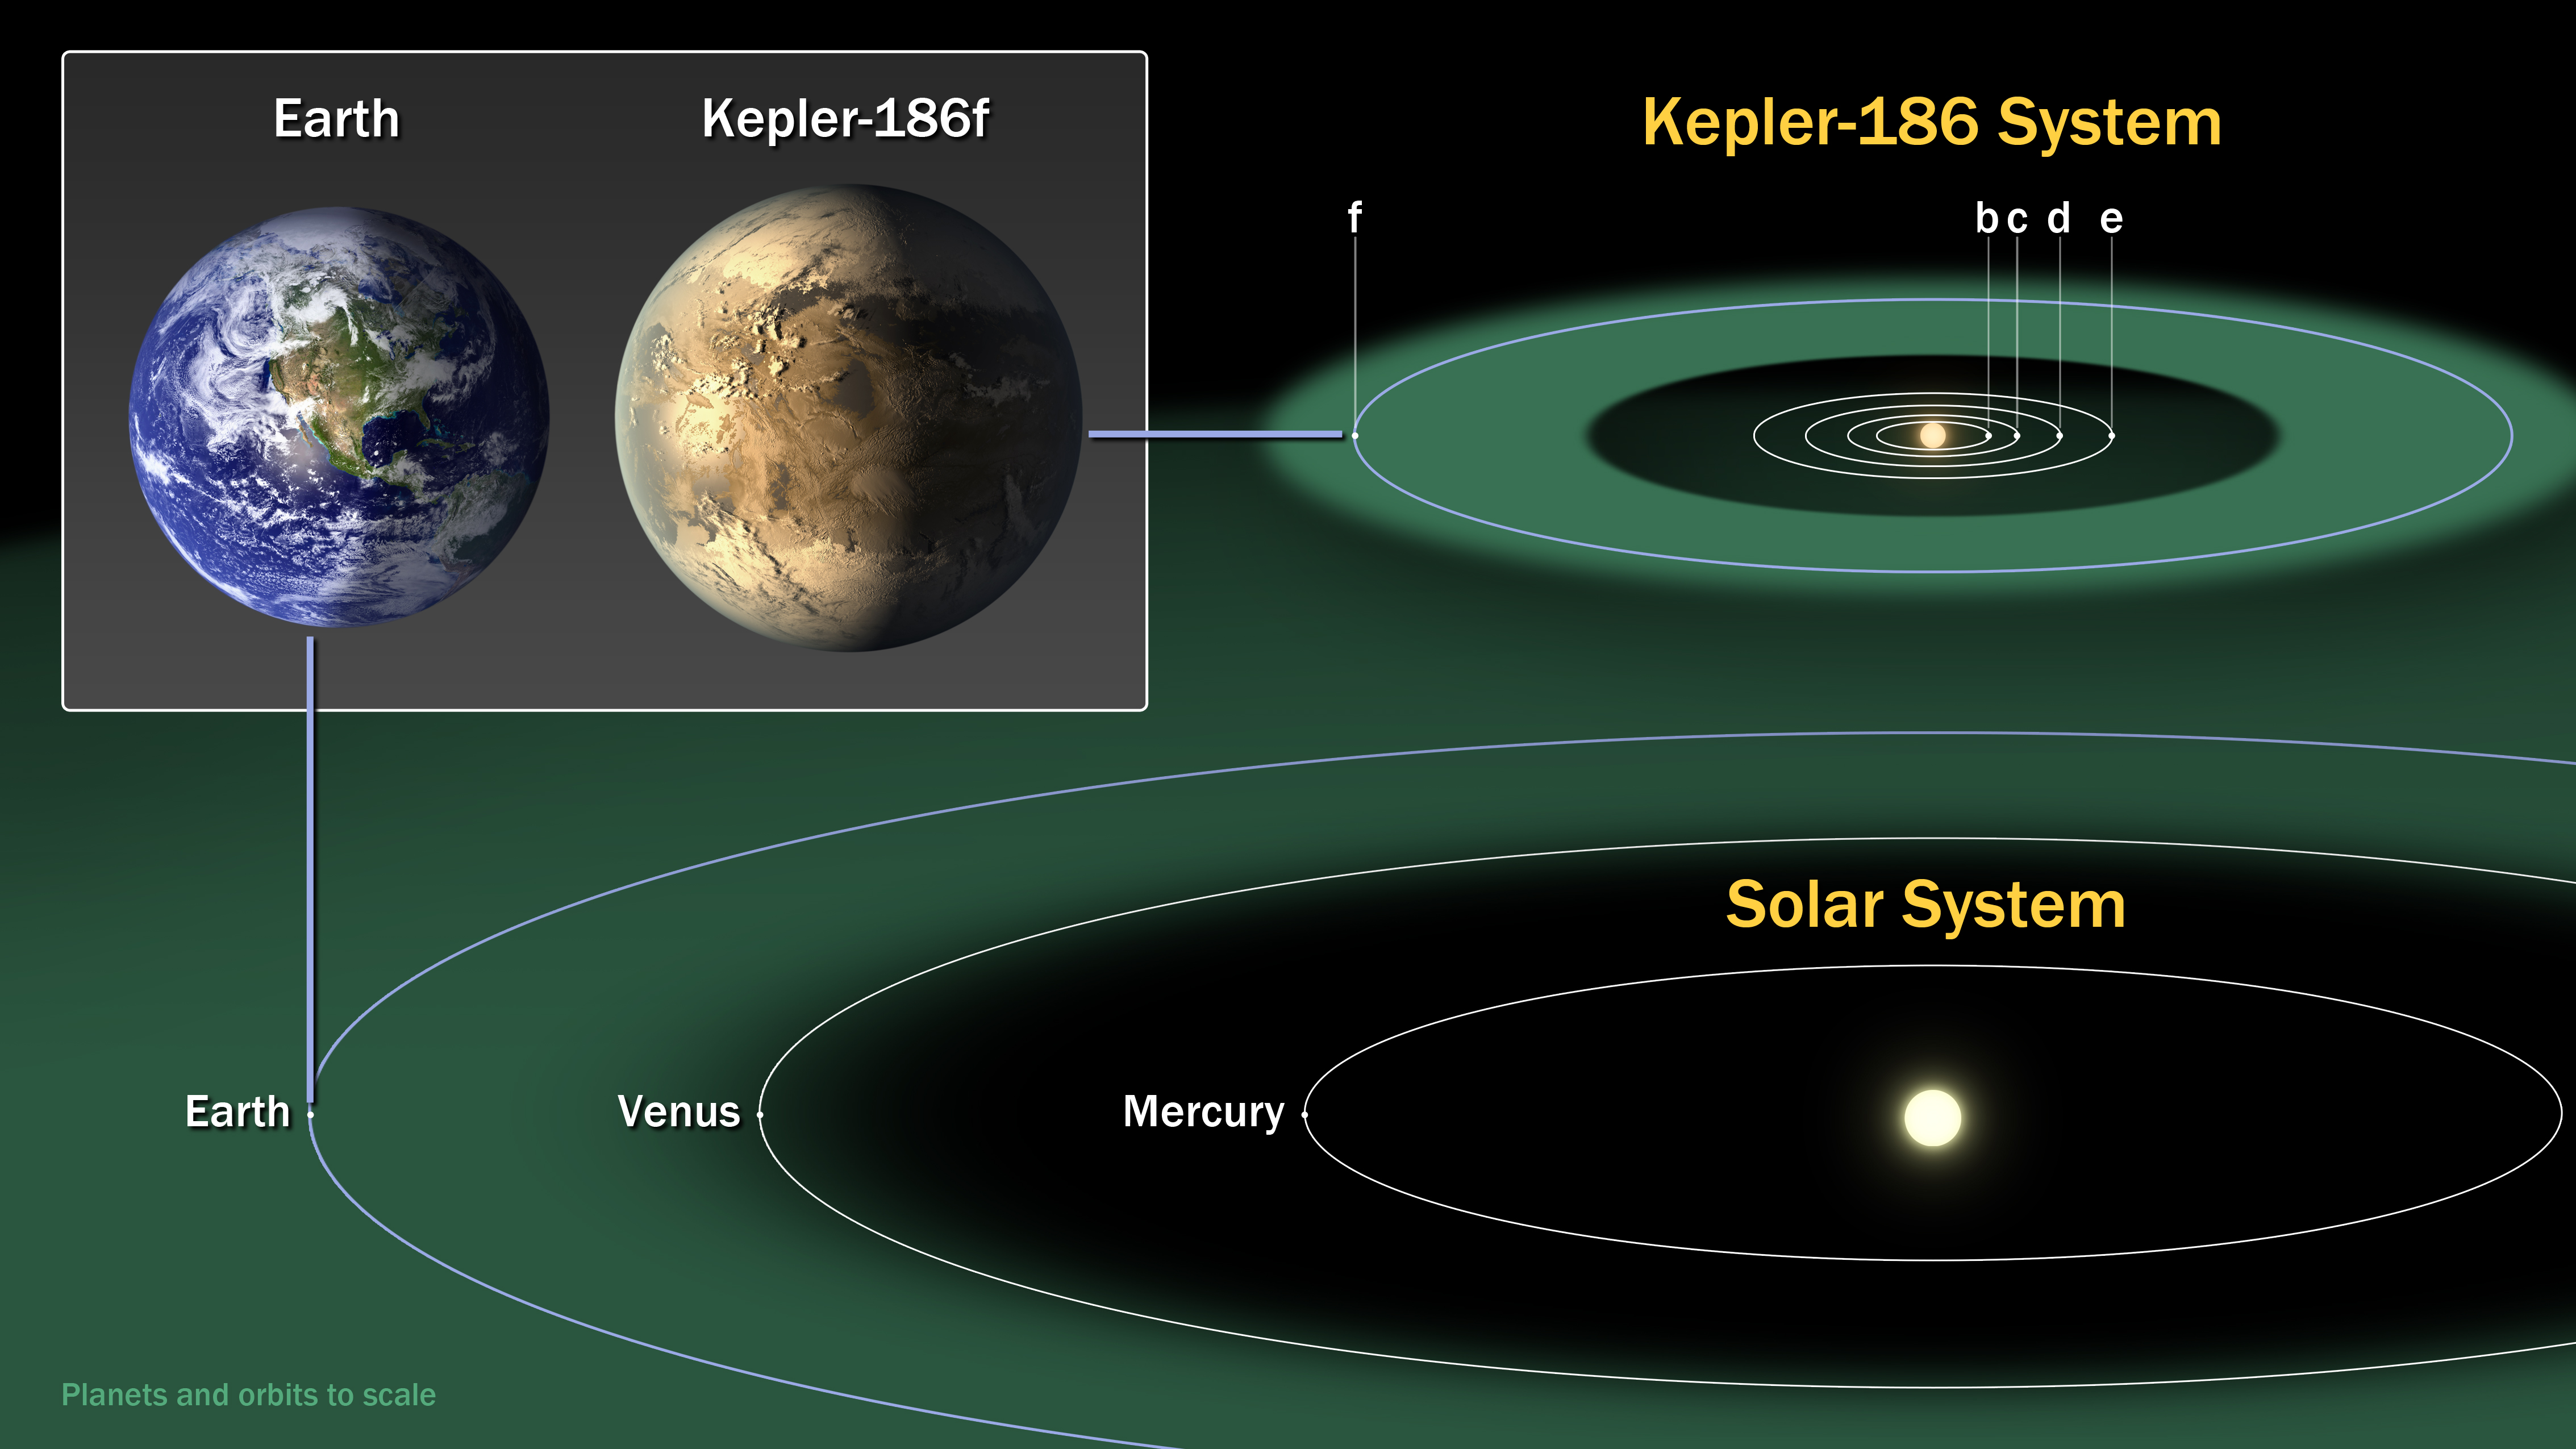 he diagram compares the planets of our inner solar system to Kepler-186, a five-planet star system about 500 light-years from Earth in the constellation Cygnus. The five planets of Kepler-186 orbit an M dwarf, a star that is is half the size and mass of the sun. Credits: NASA 